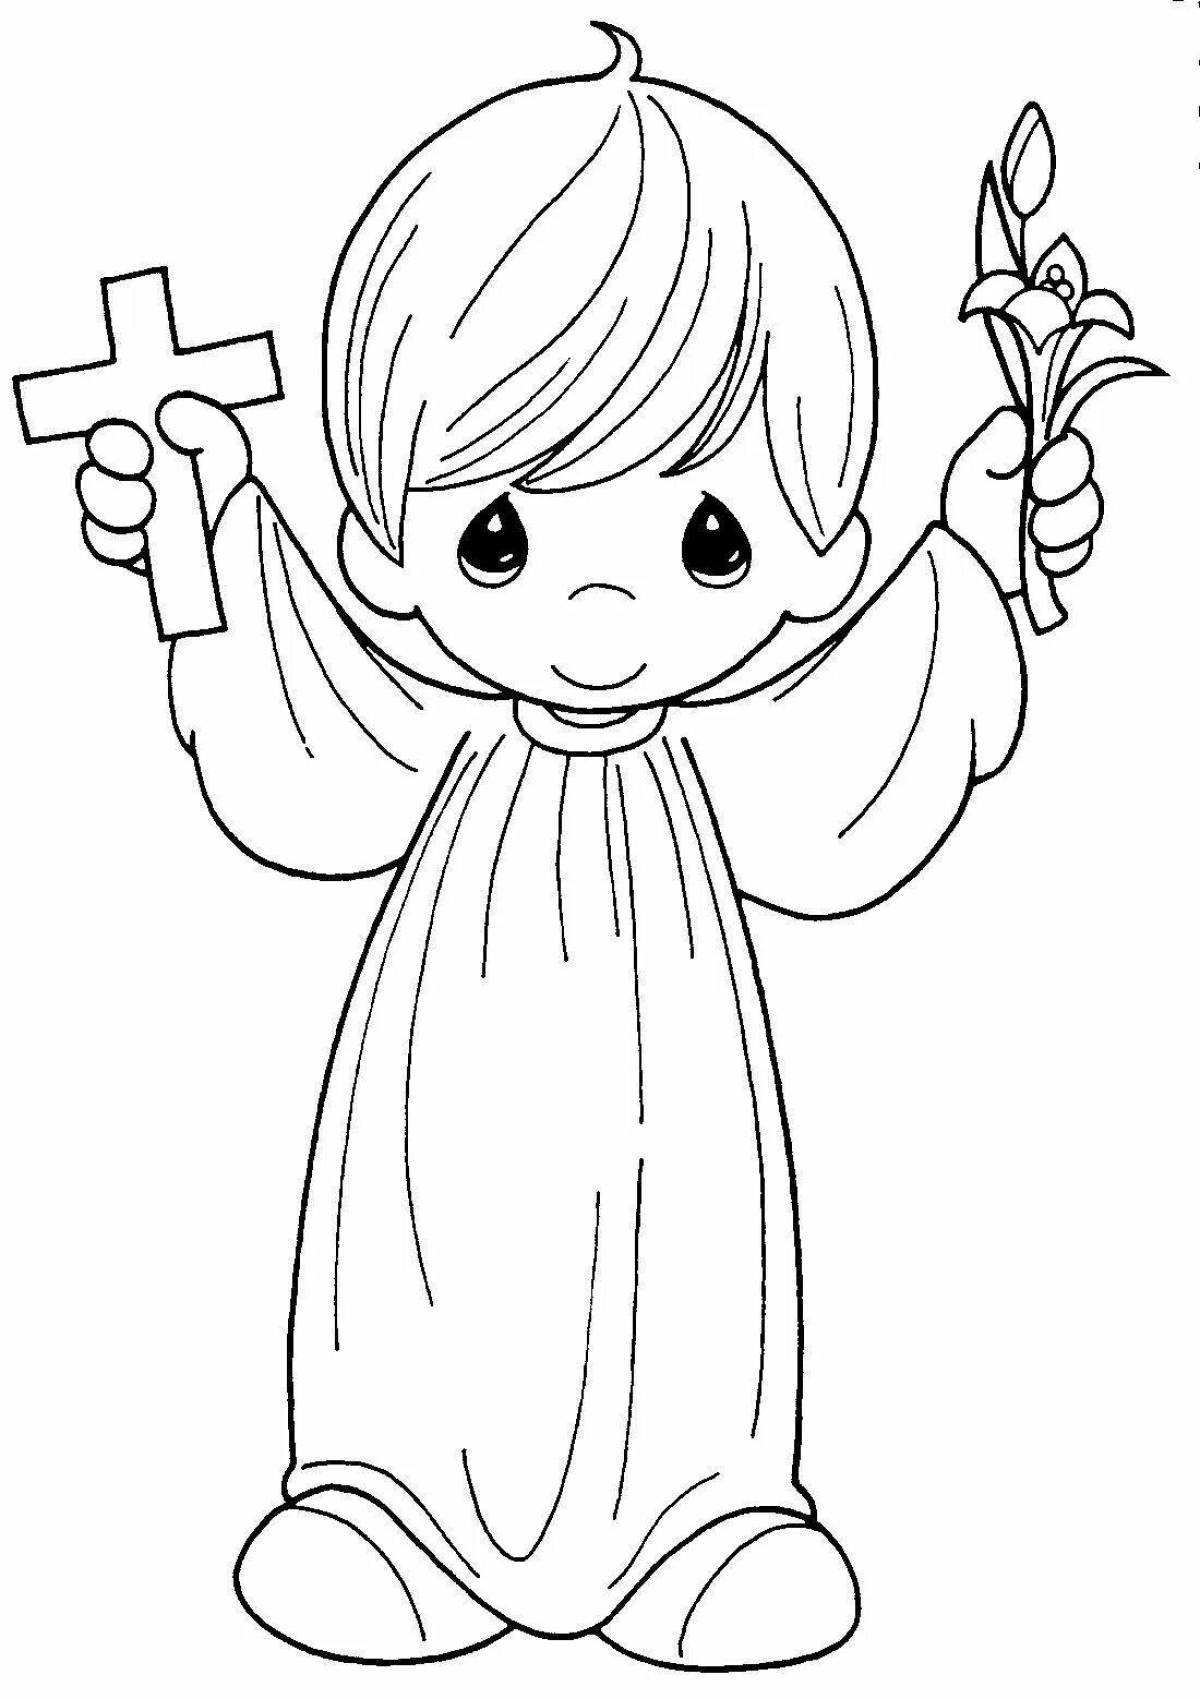 Coloring page glamorous christening card